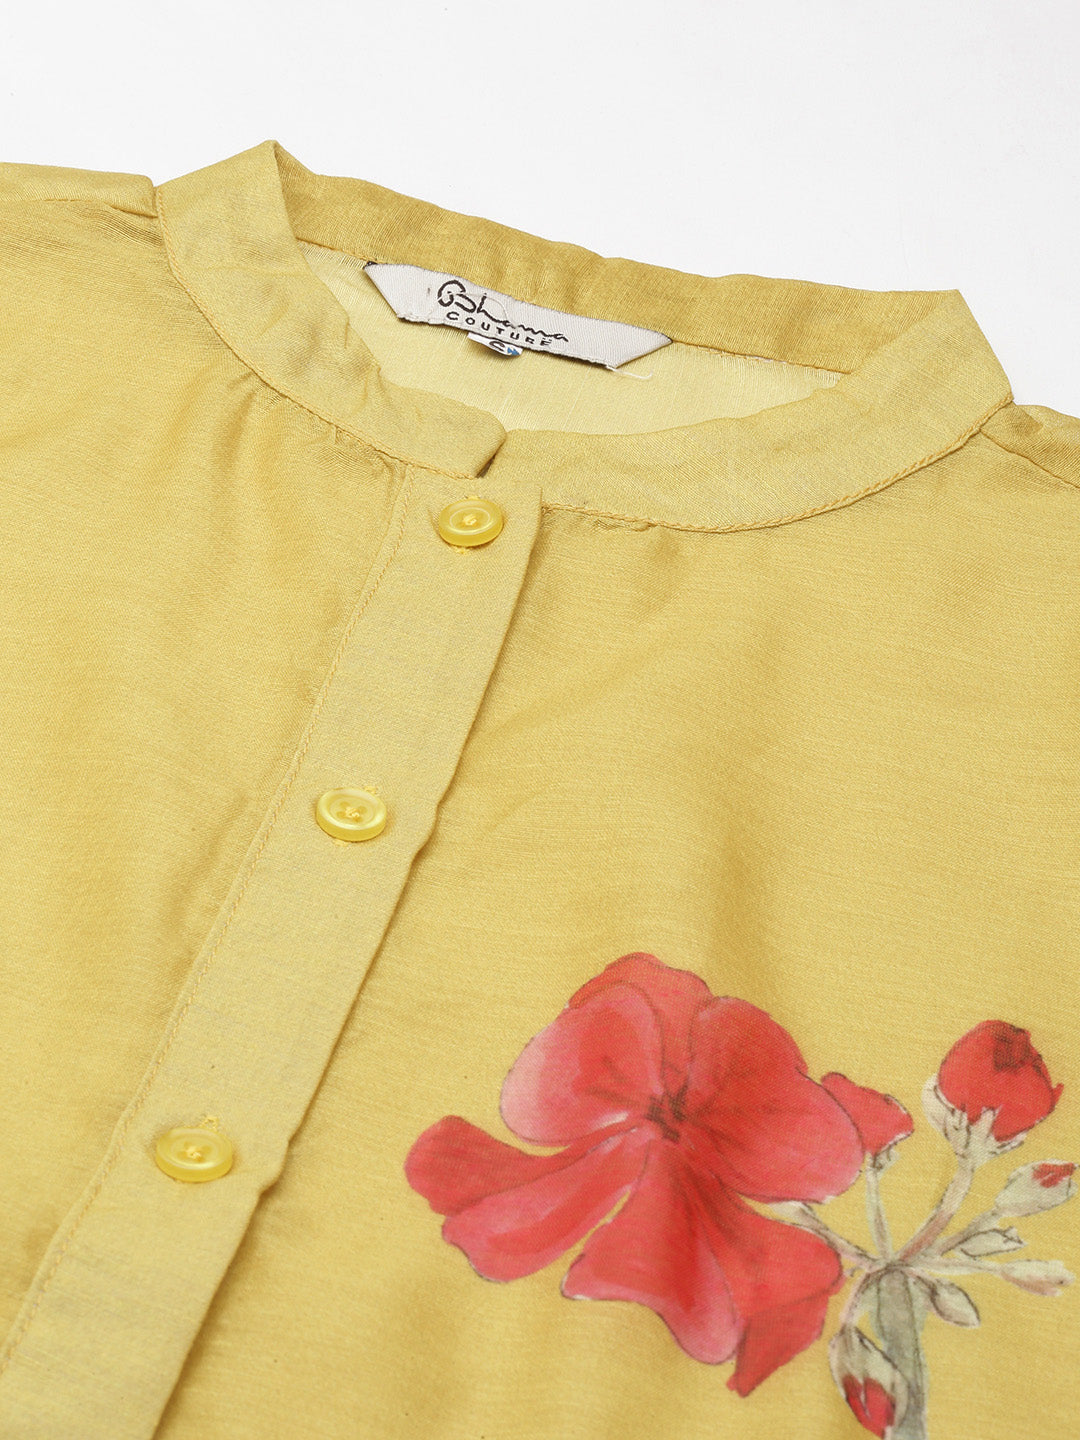 Bhama Couture Mustard Yellow & Red Floral Print Shirt Style Top